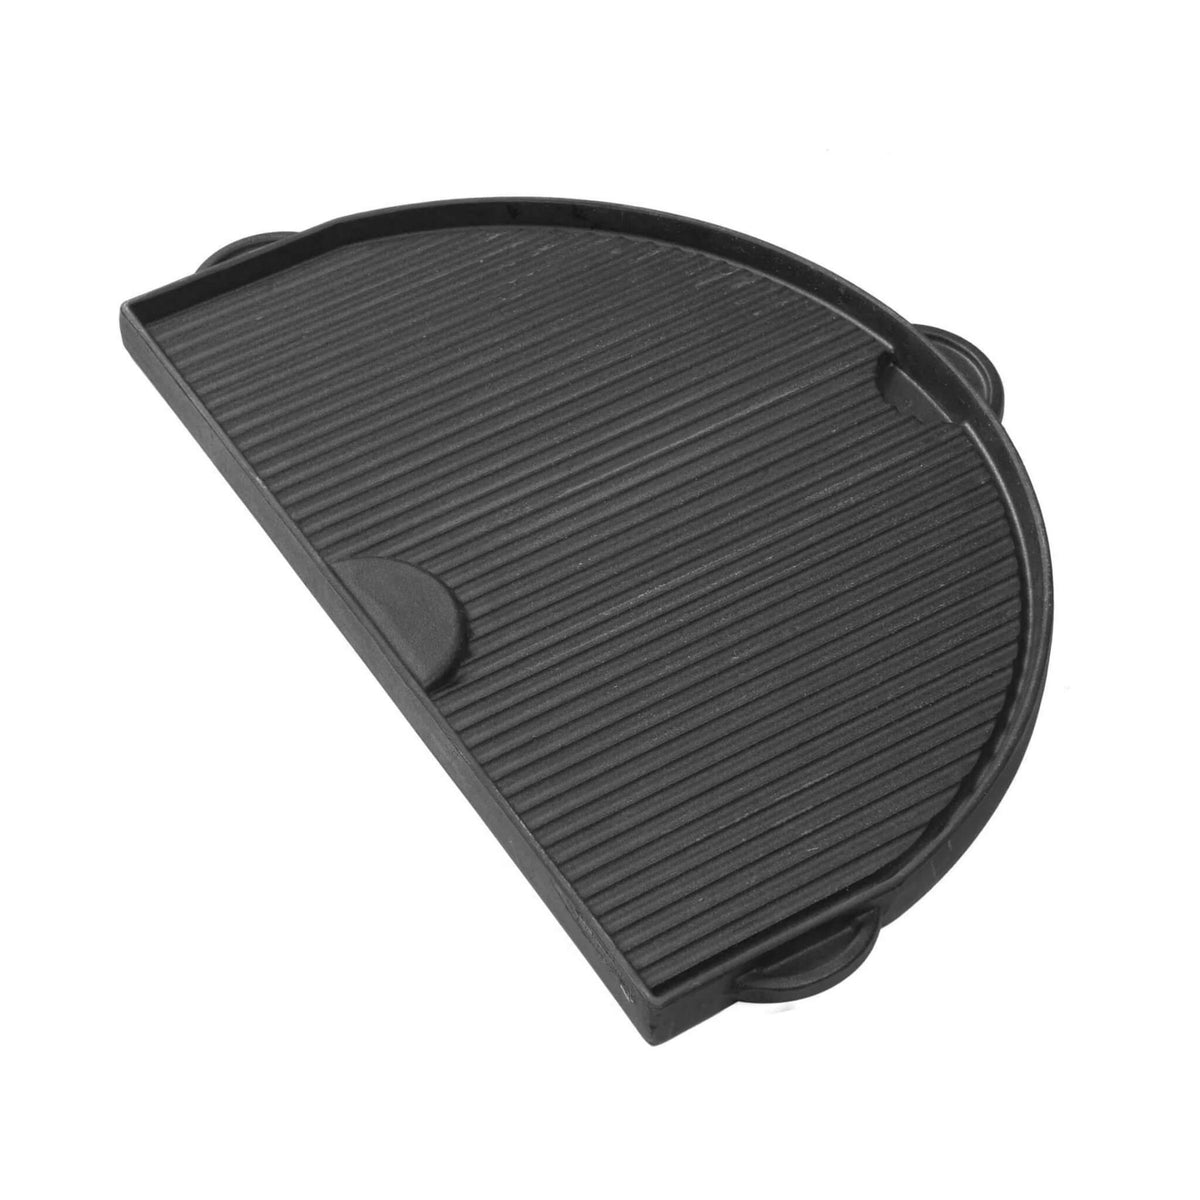 Primo Grill Cast Iron Griddle, Flat and Grooved Sides (1 pc)